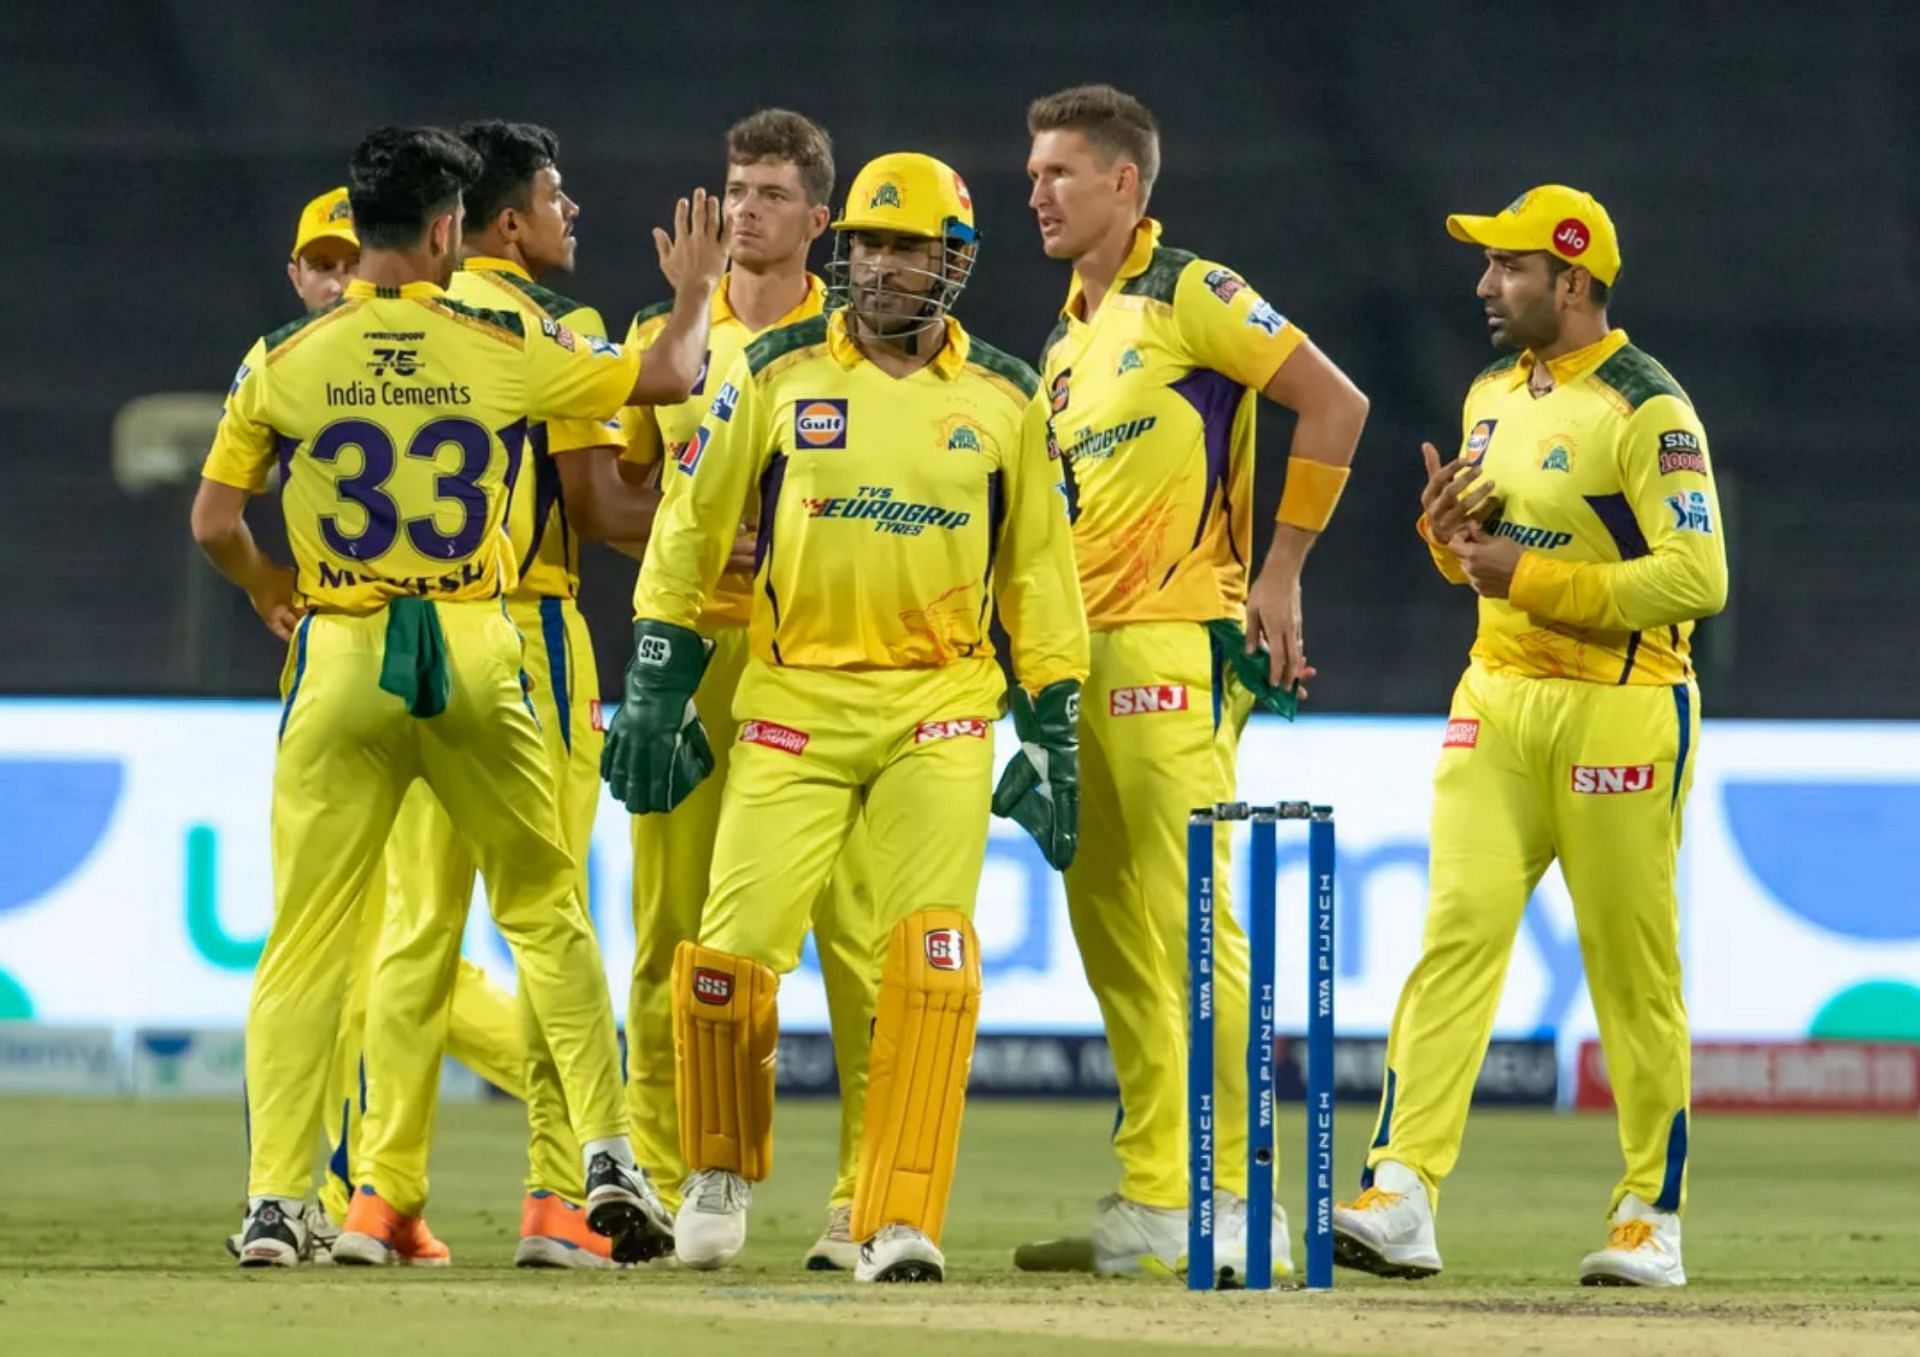 CSK have had a disappointing IPL 2022 campaign (Picture Credits: IPL).